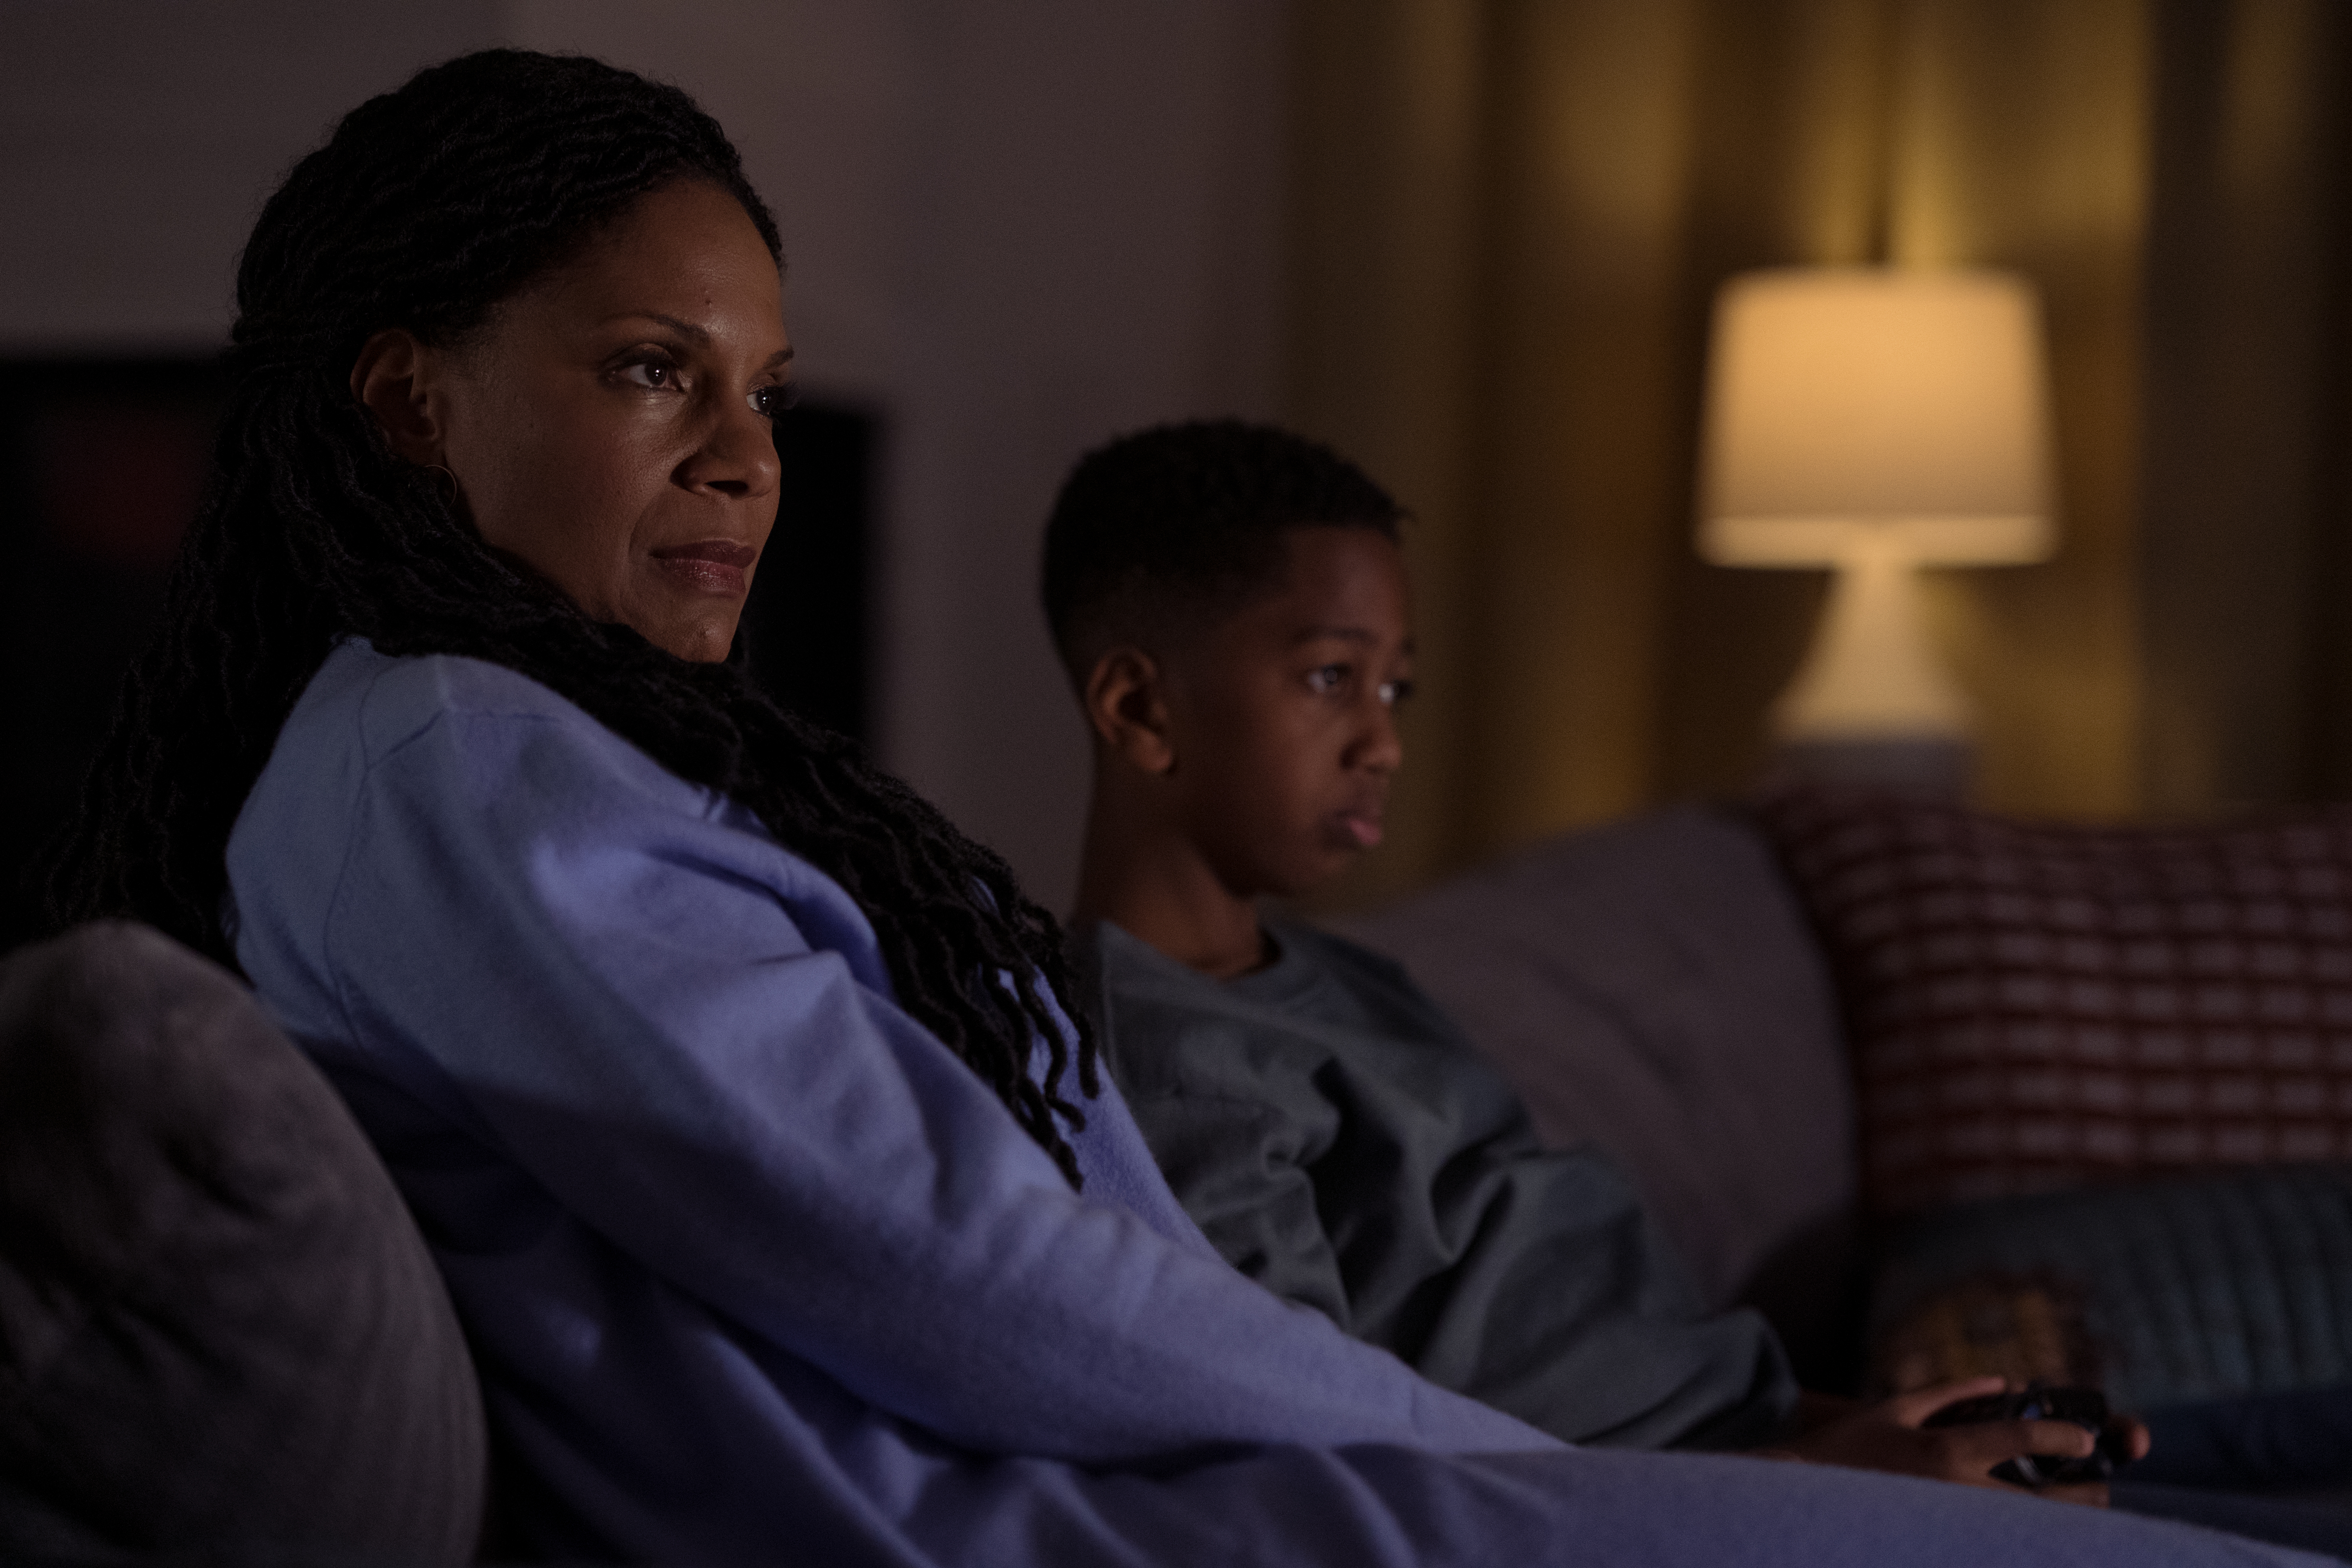 The Good Fight 6x05 "The End of Ginni" Audra McDonald as Liz Reddick and Che Tefari as Malcom in The Good Fight episode 5, Season 6 streaming on Paramount+, 2022. Photo Credit: Elizabeth Fisher/Paramount+.